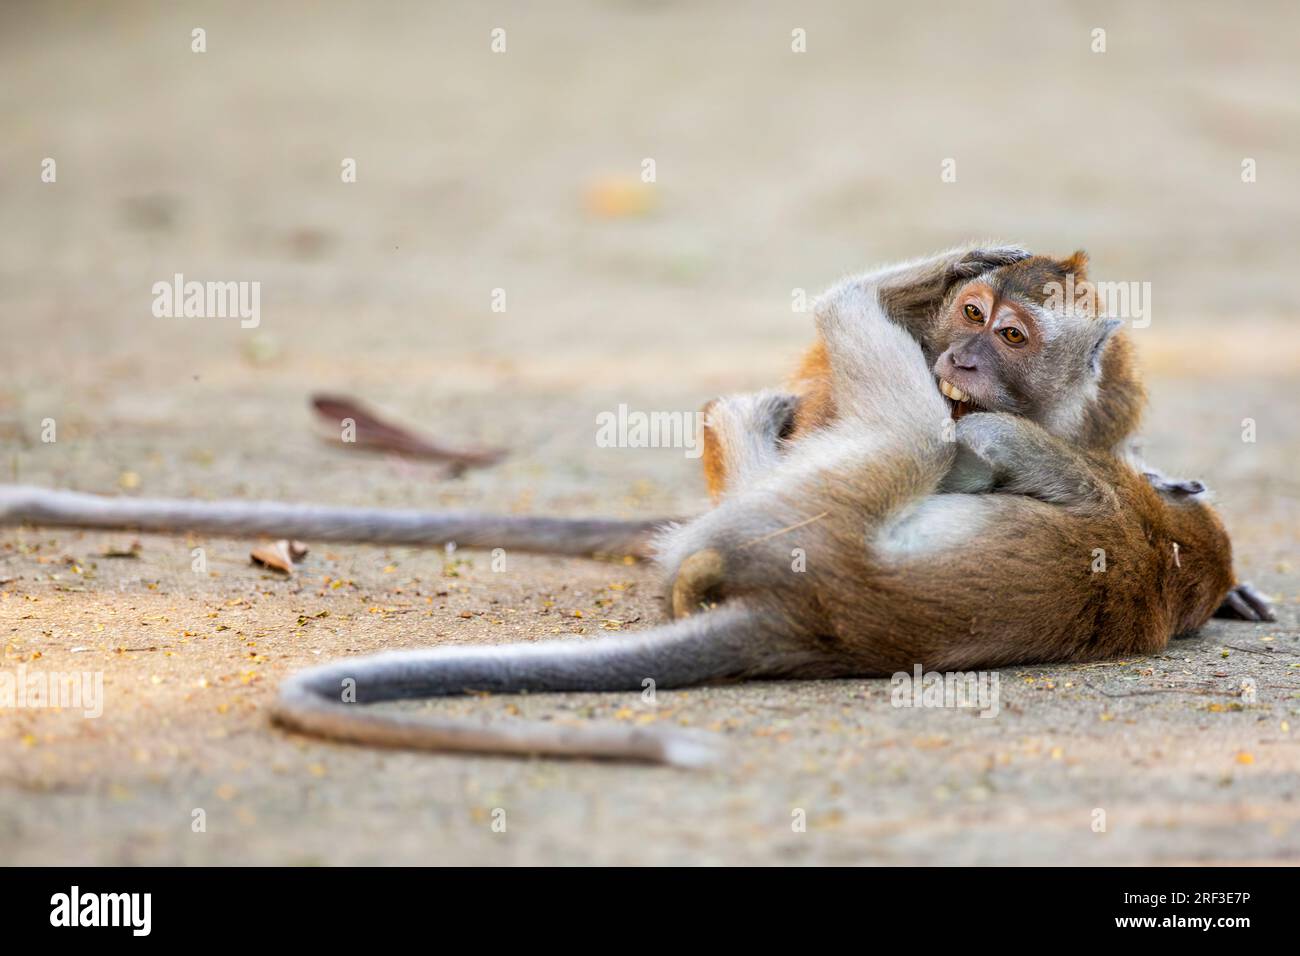 Two long-tailed macaques play fight and wrestle on the tarmac along Punggol Promenade Nature Walk, Singapore Stock Photo